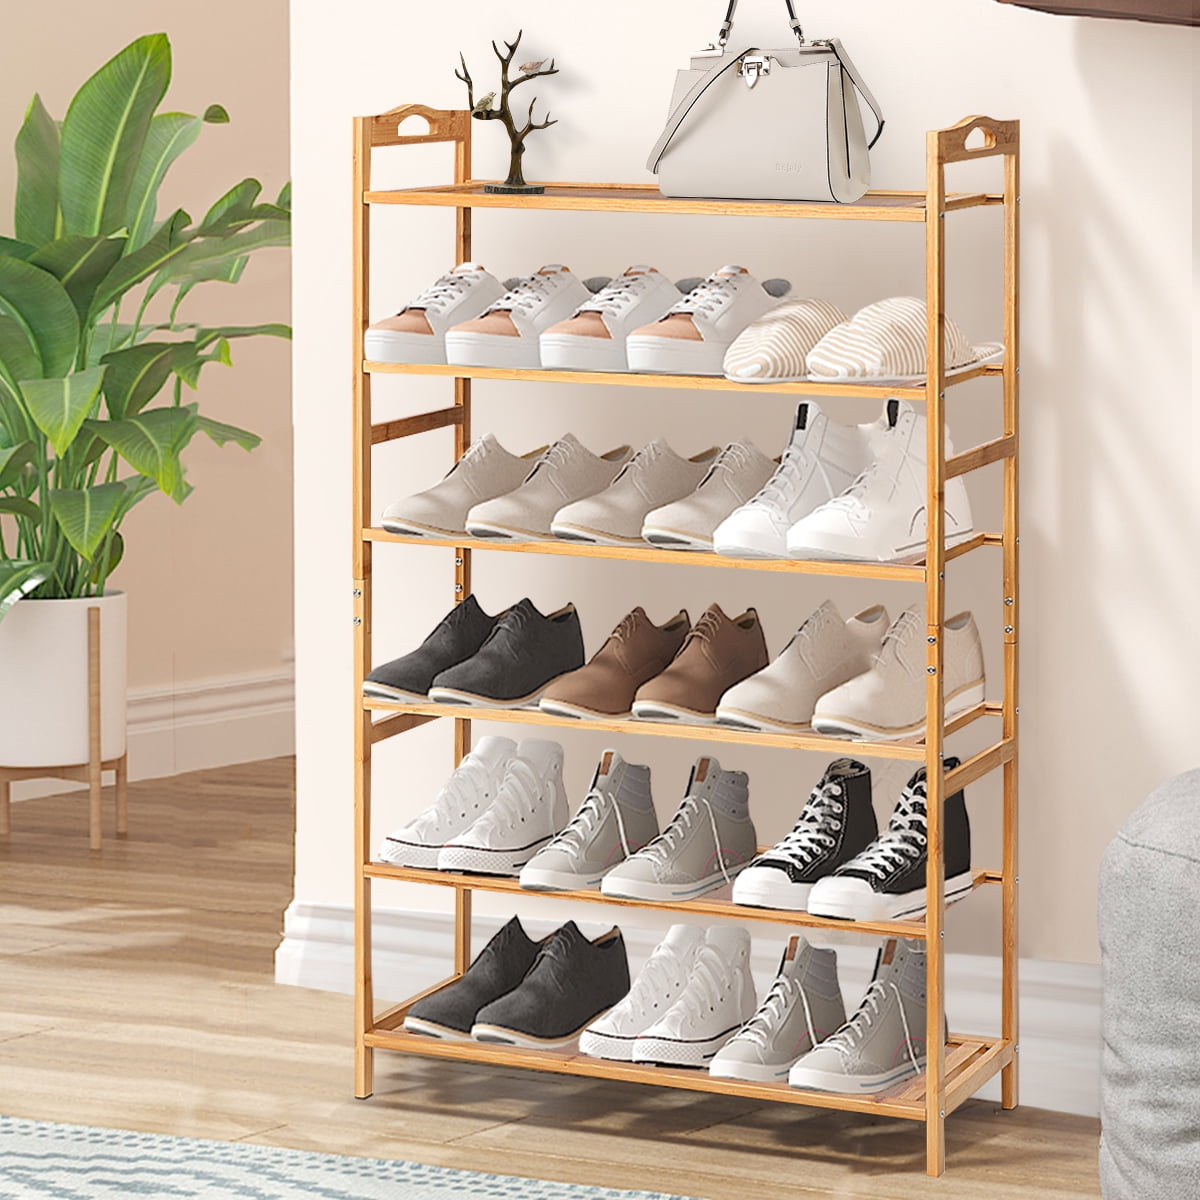 New 6Tier Durable Dustproof Shoe Rack Holder Shoes Organizers Storage Space Save 